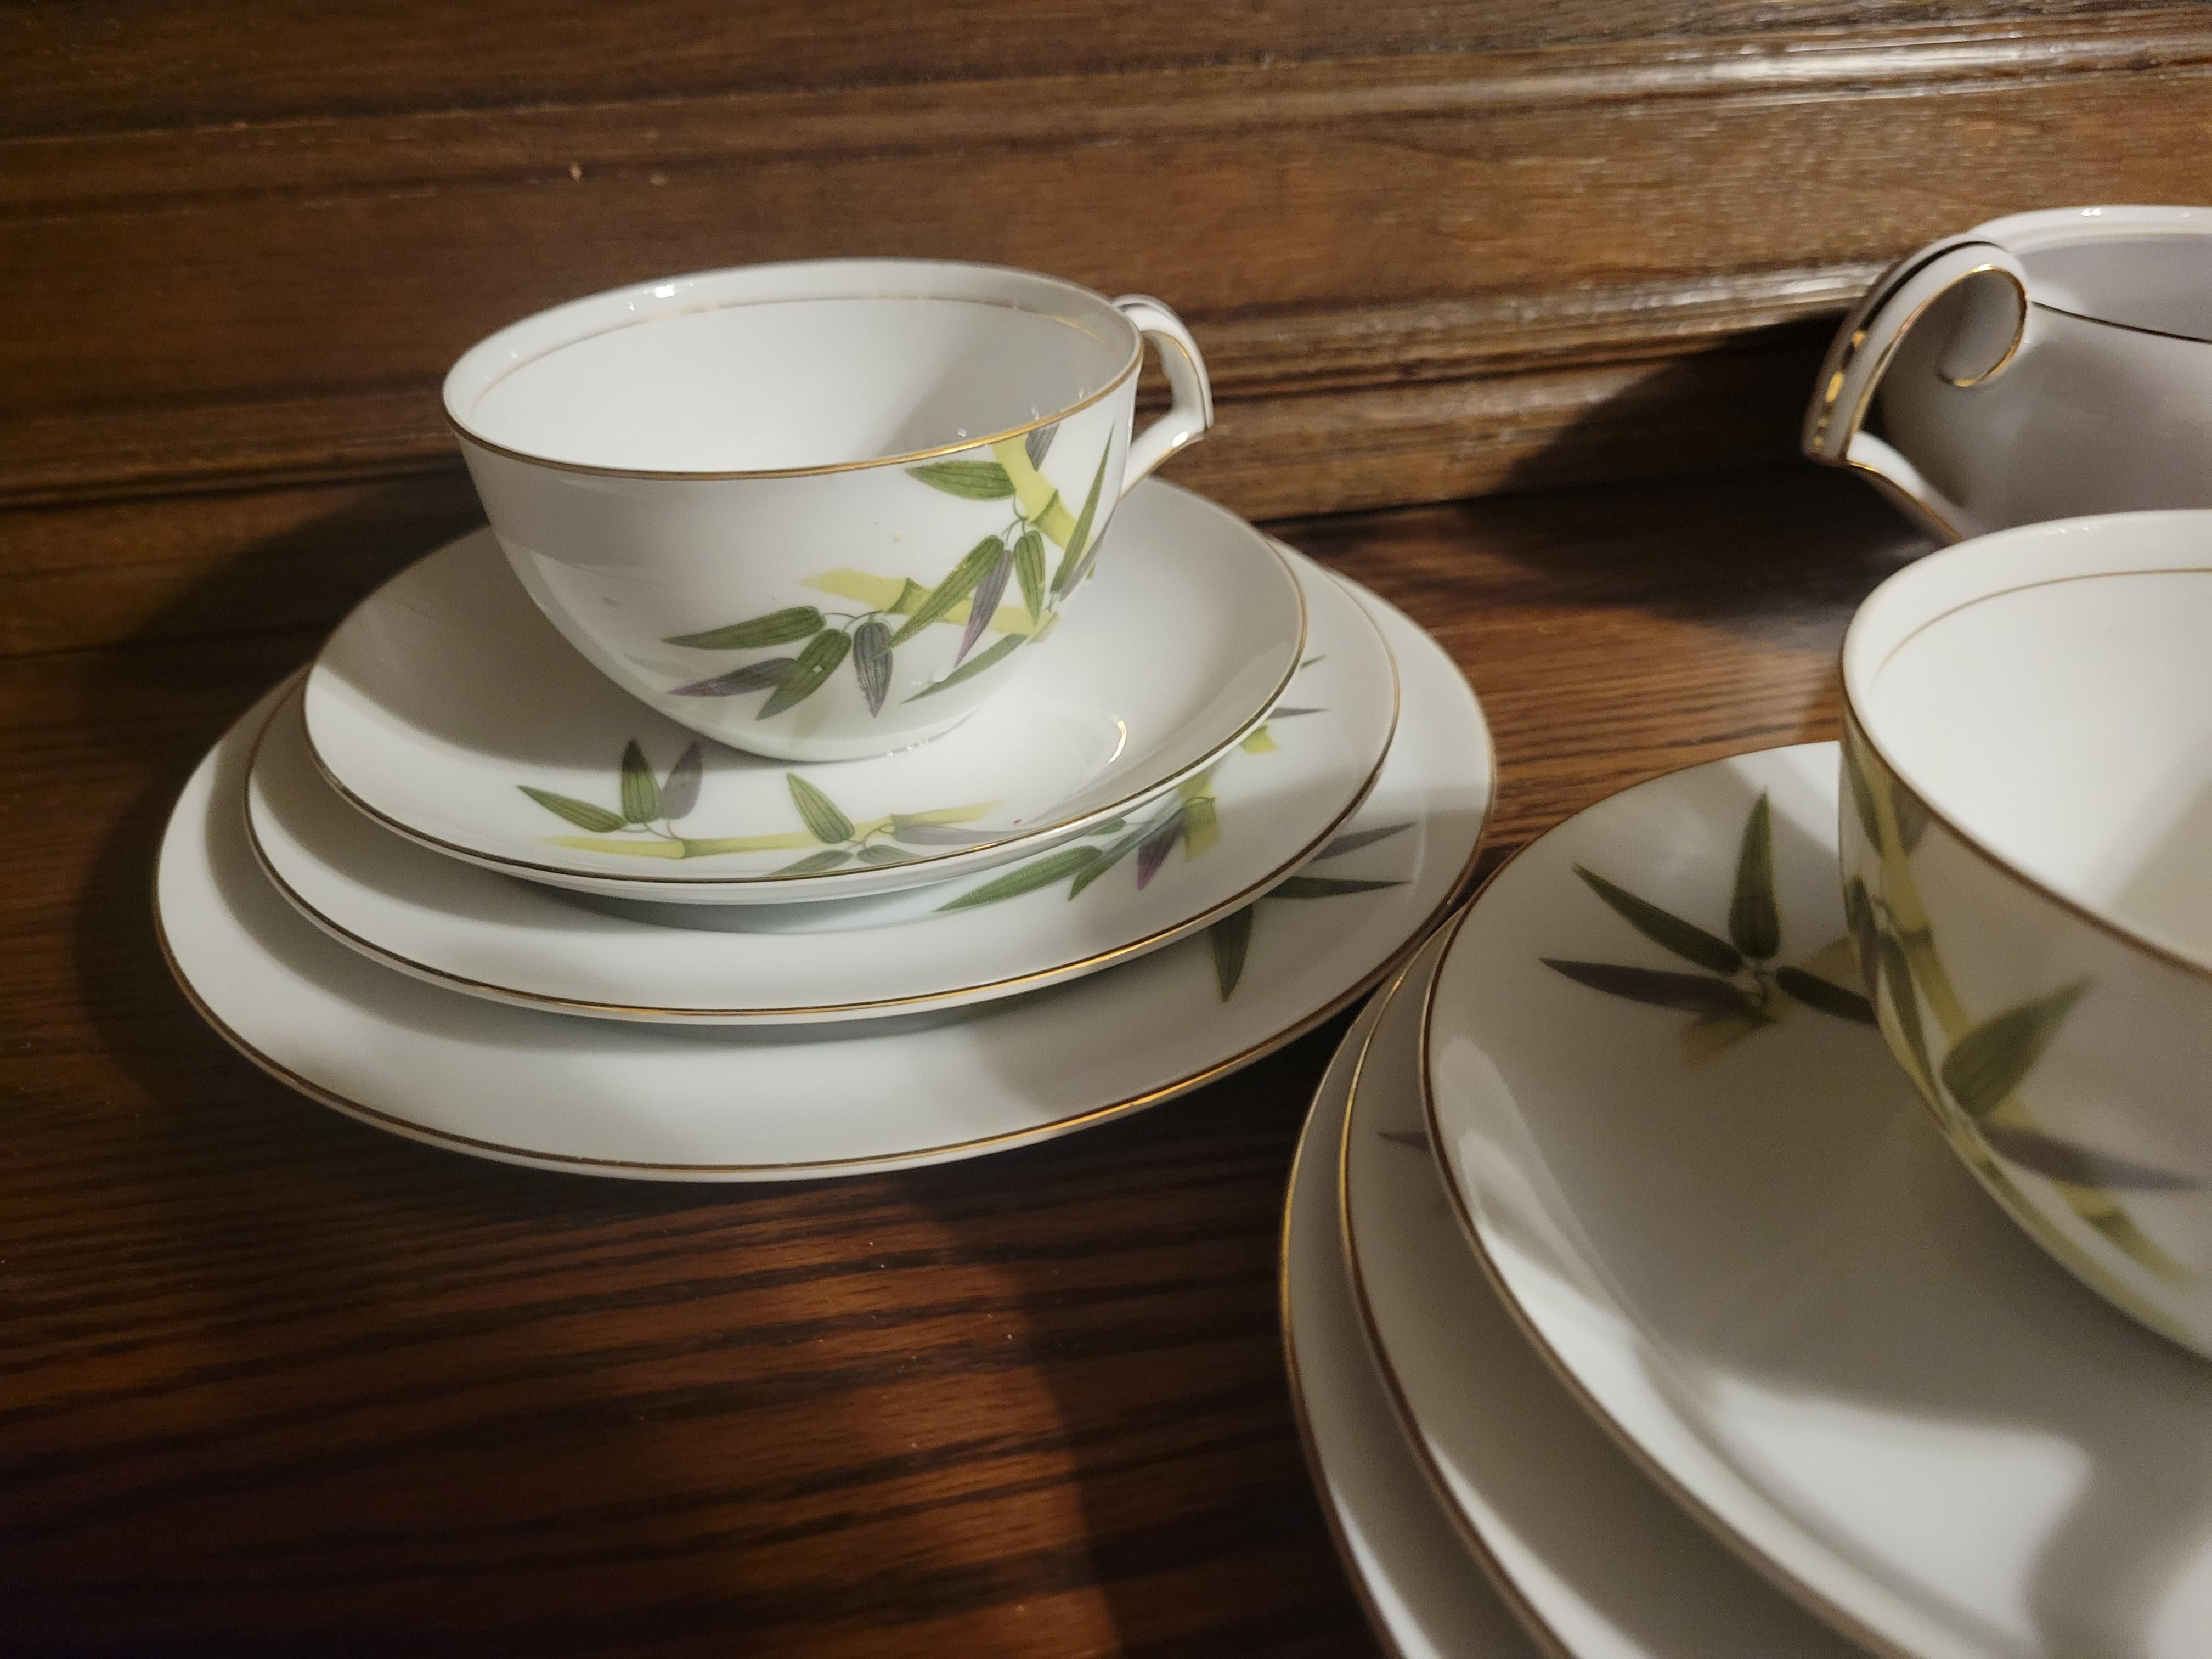 1951 Narumi Japan 'Spring Bamboo' Fine China Set - 24 pieces plus replacements  For Sale 3